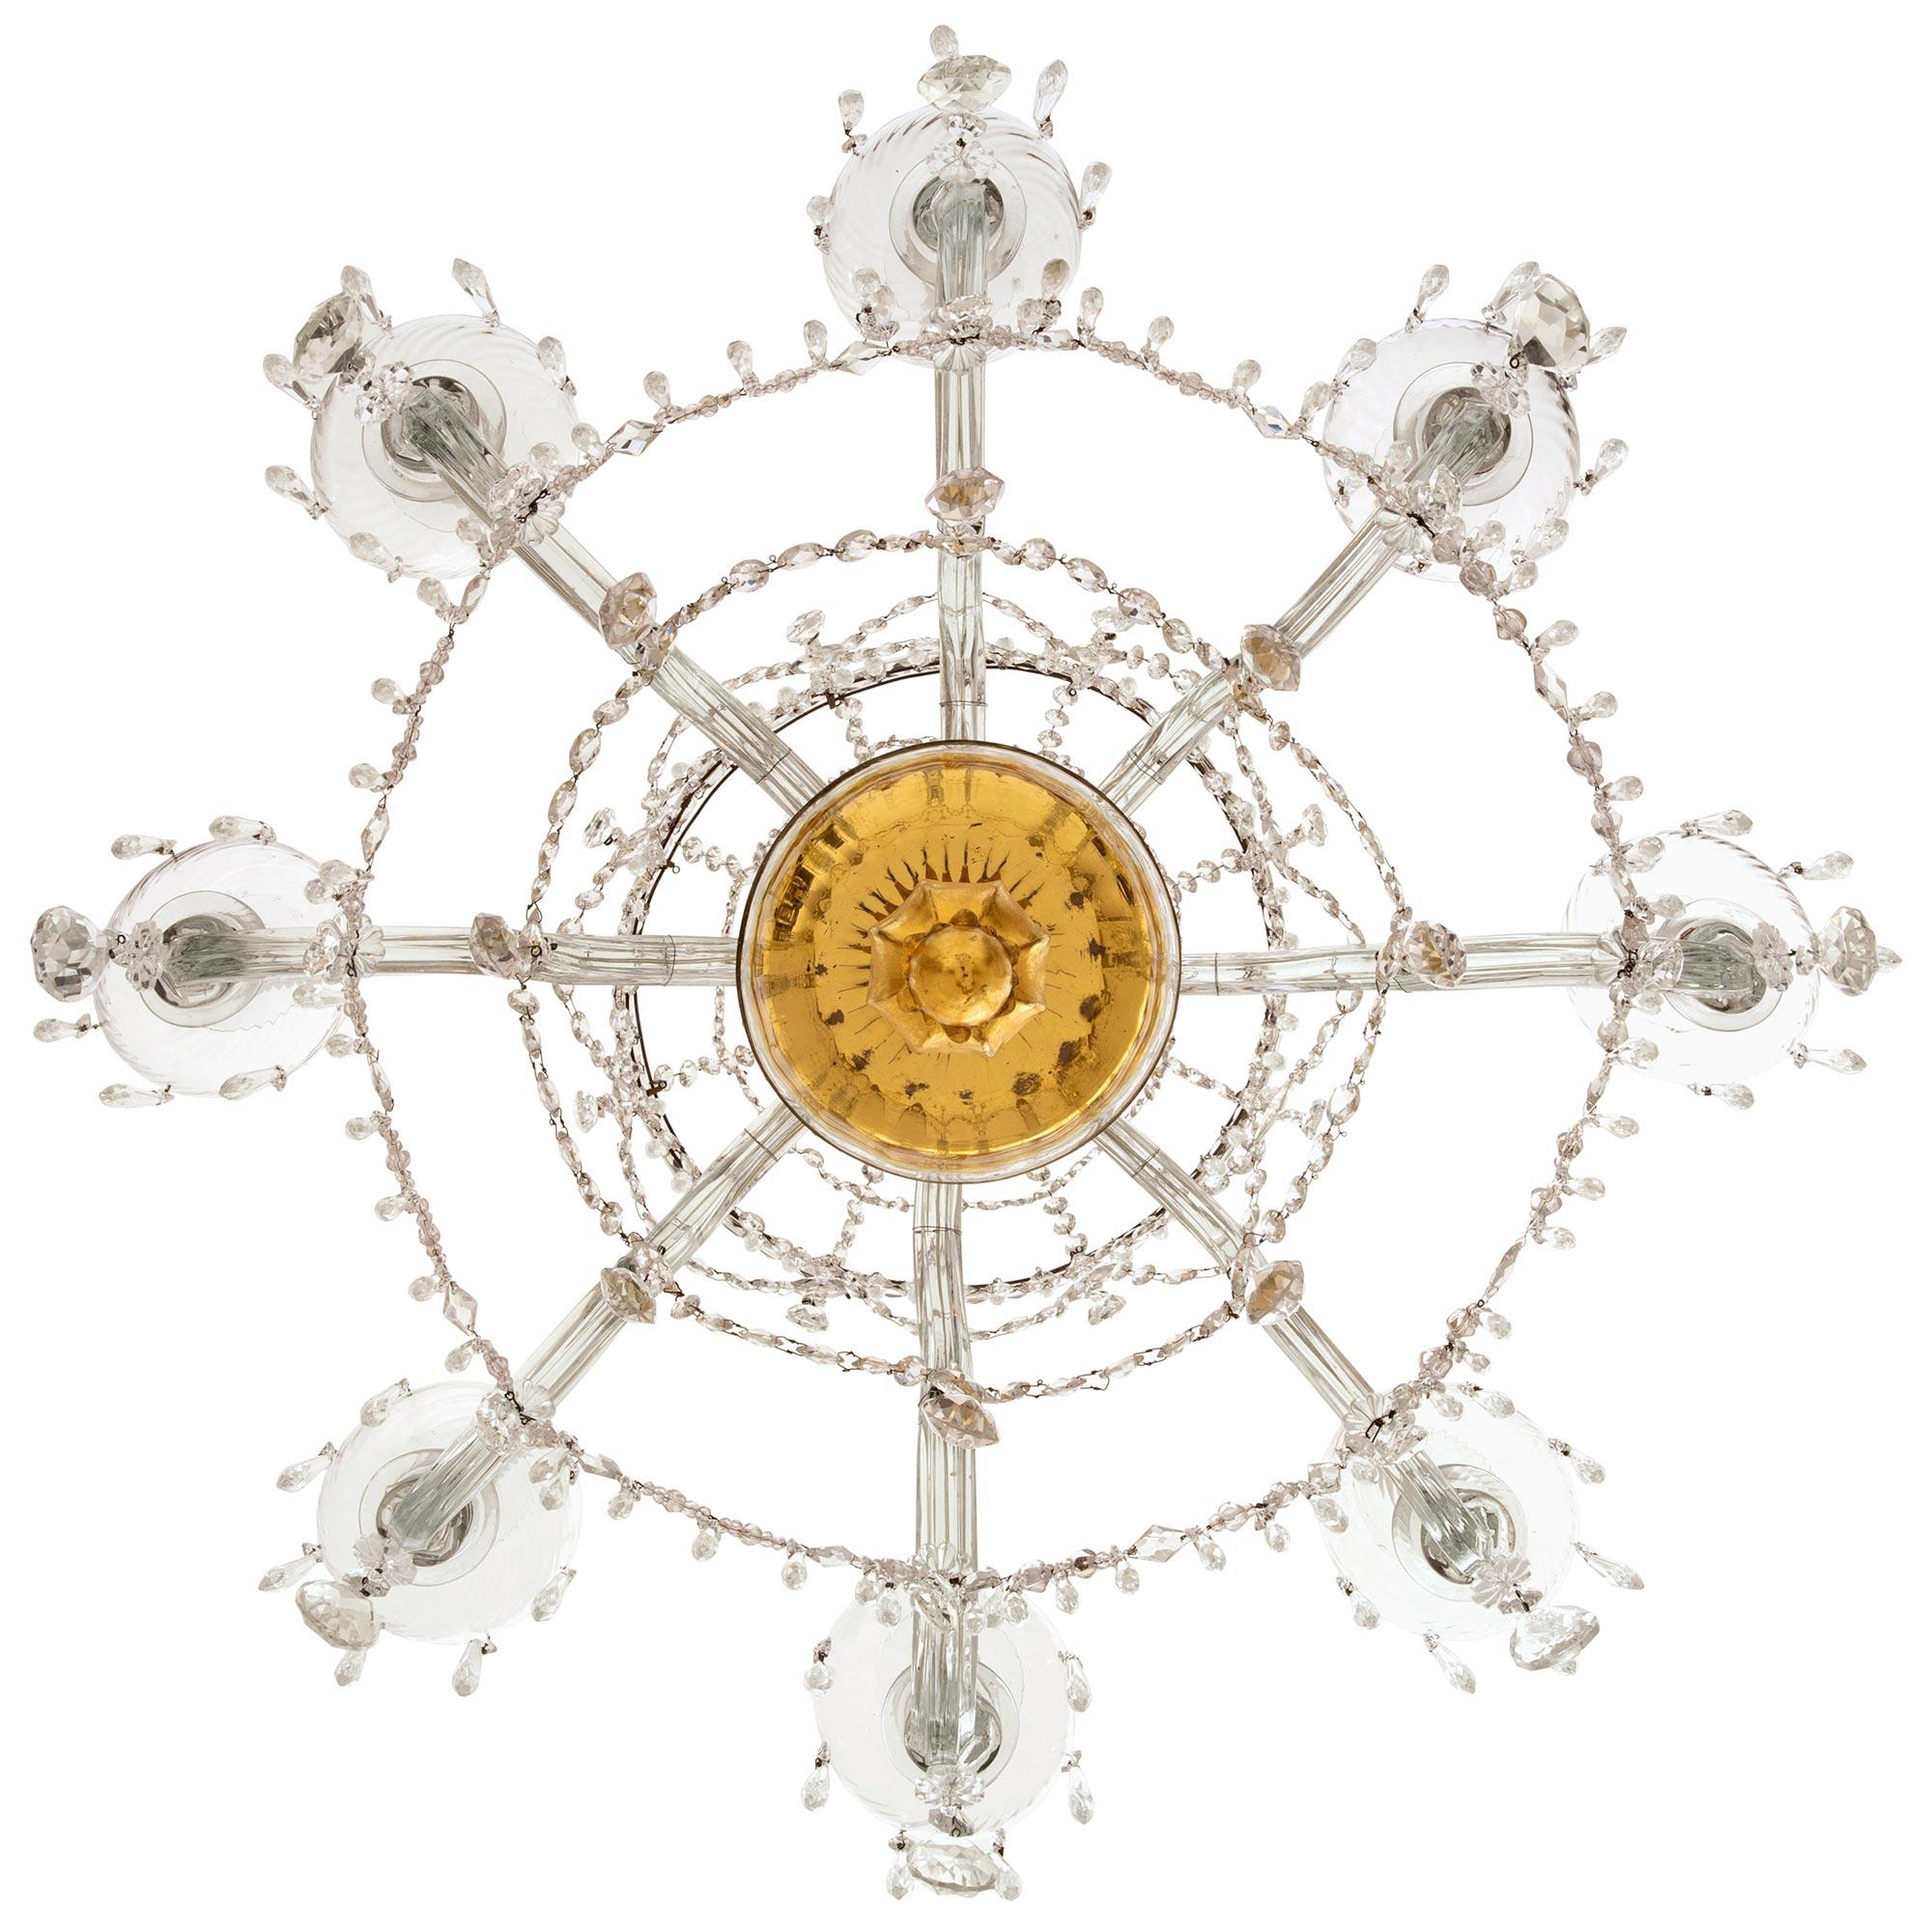 A stunning and extremely decorative Italian 18th century Venetian St. Murano glass and giltwood chandelier. The eight arm chandelier is centered by a beautiful richly carved foliate giltwood finial below the elegant curved Murano glass support and